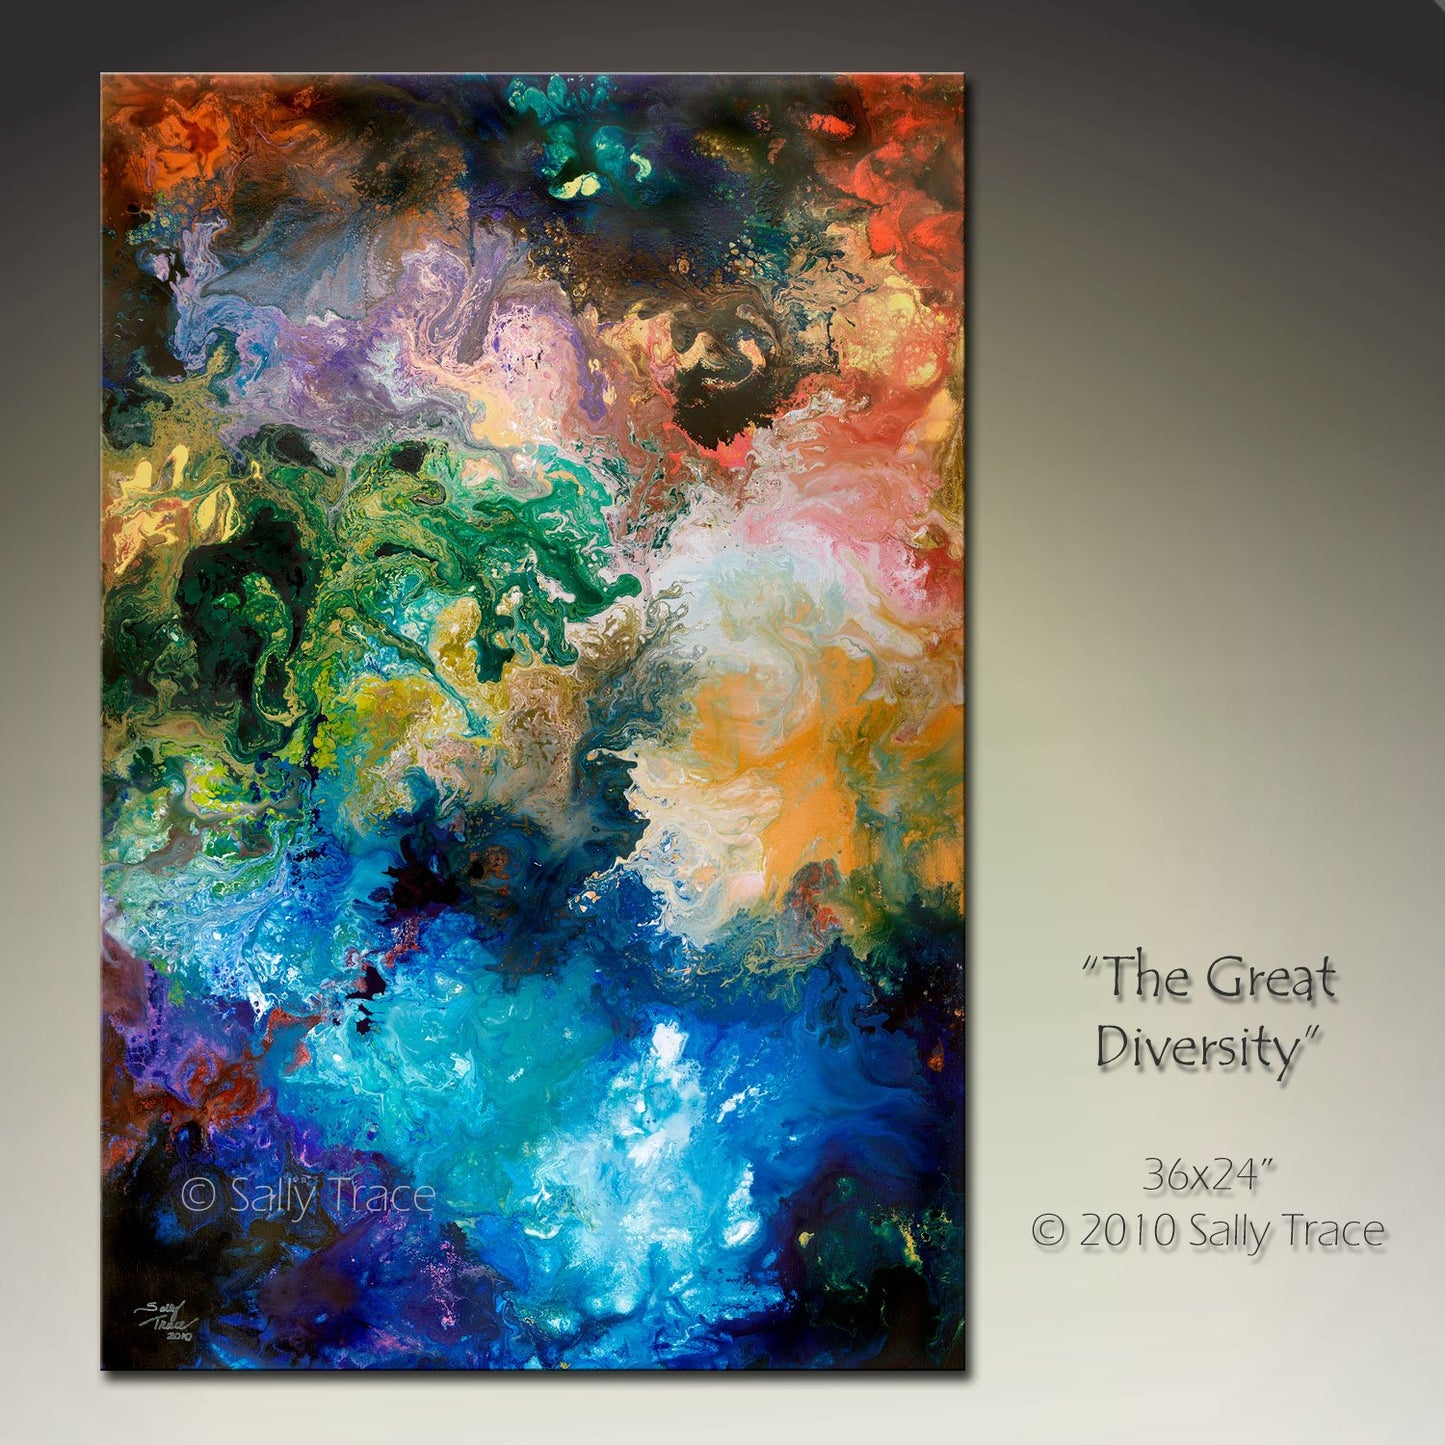 "The Great Diversity" giclee prints on canvas by Sally Trace